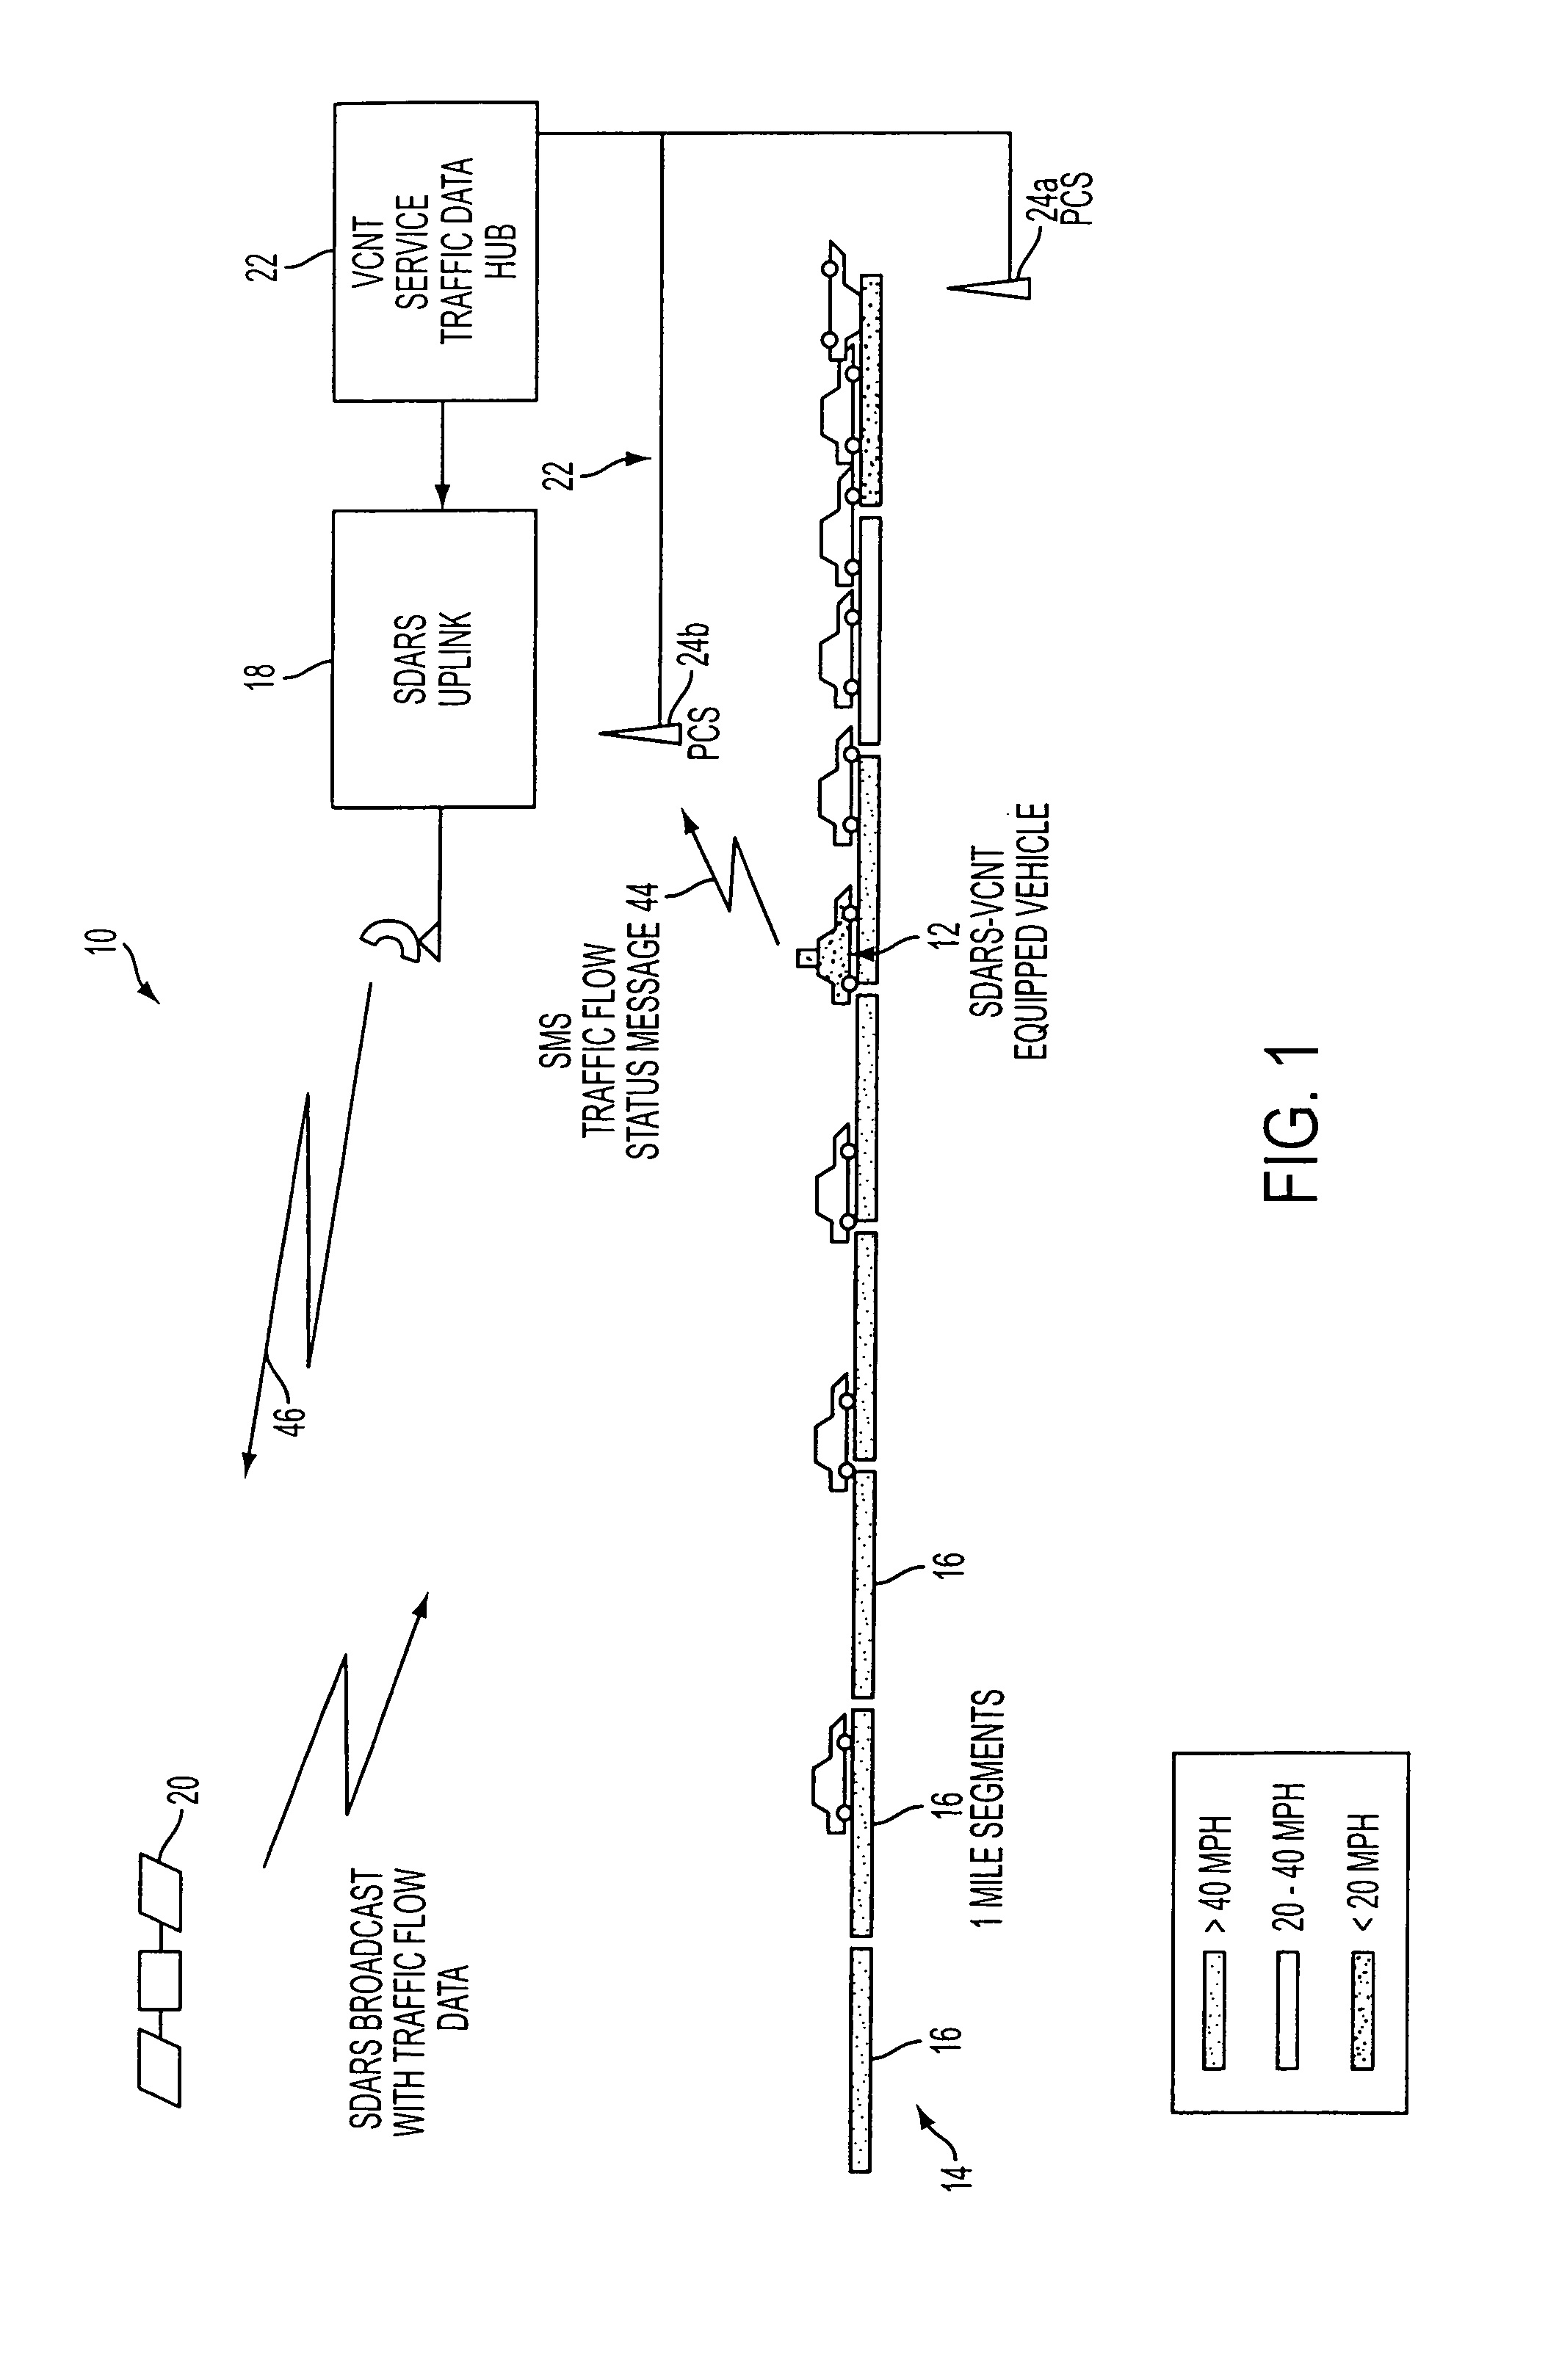 System and method for improved traffic flow reporting using satellite digital audio radio service (SDARS) and vehicle communications, navigation and tracking system